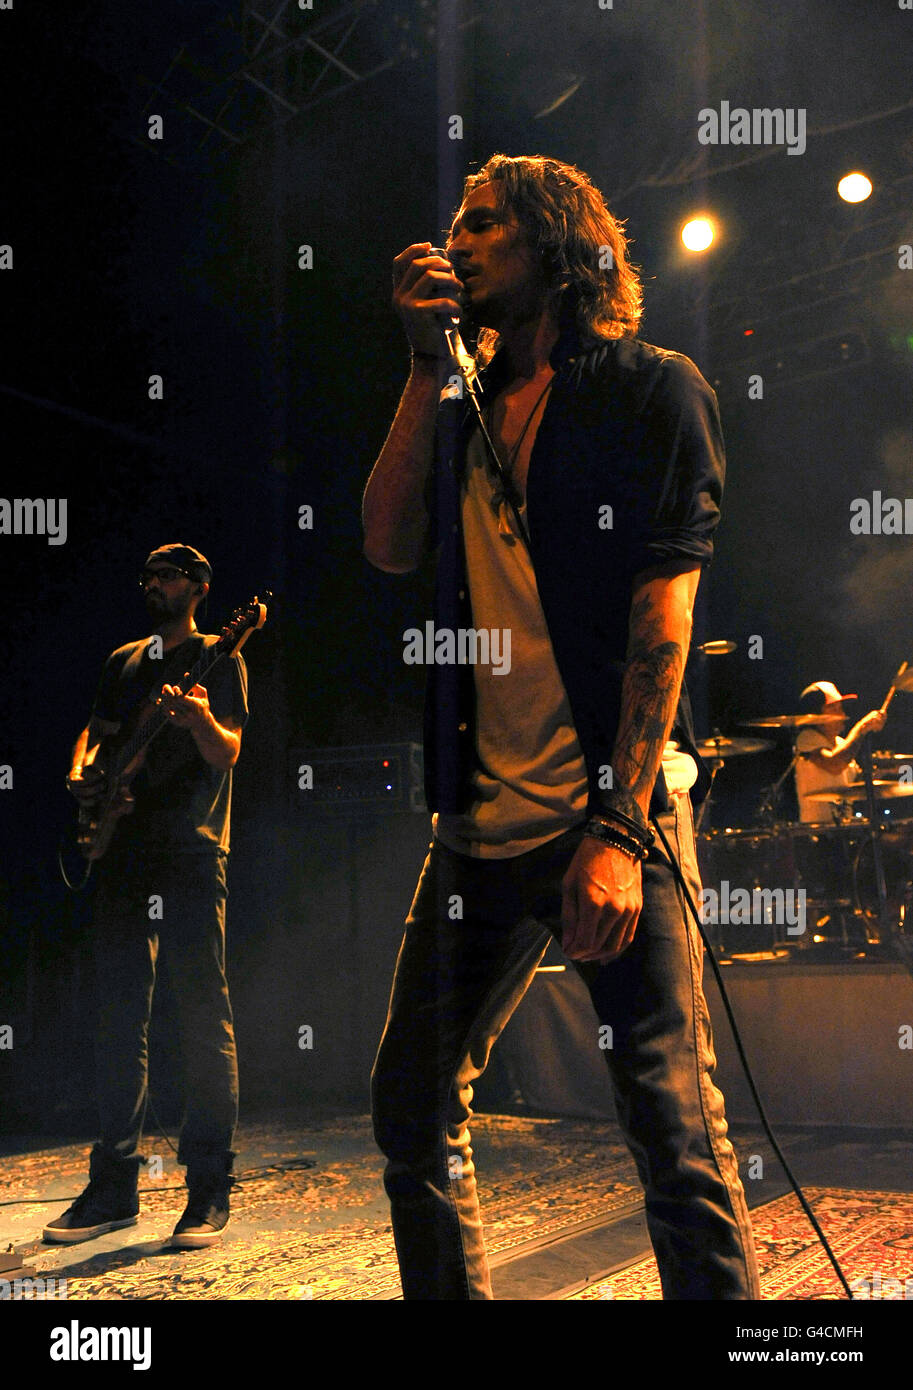 Brandon Boyd and Ben Kenney (left) of Incubus perform on stage at the HMV Forum in north London. Stock Photo